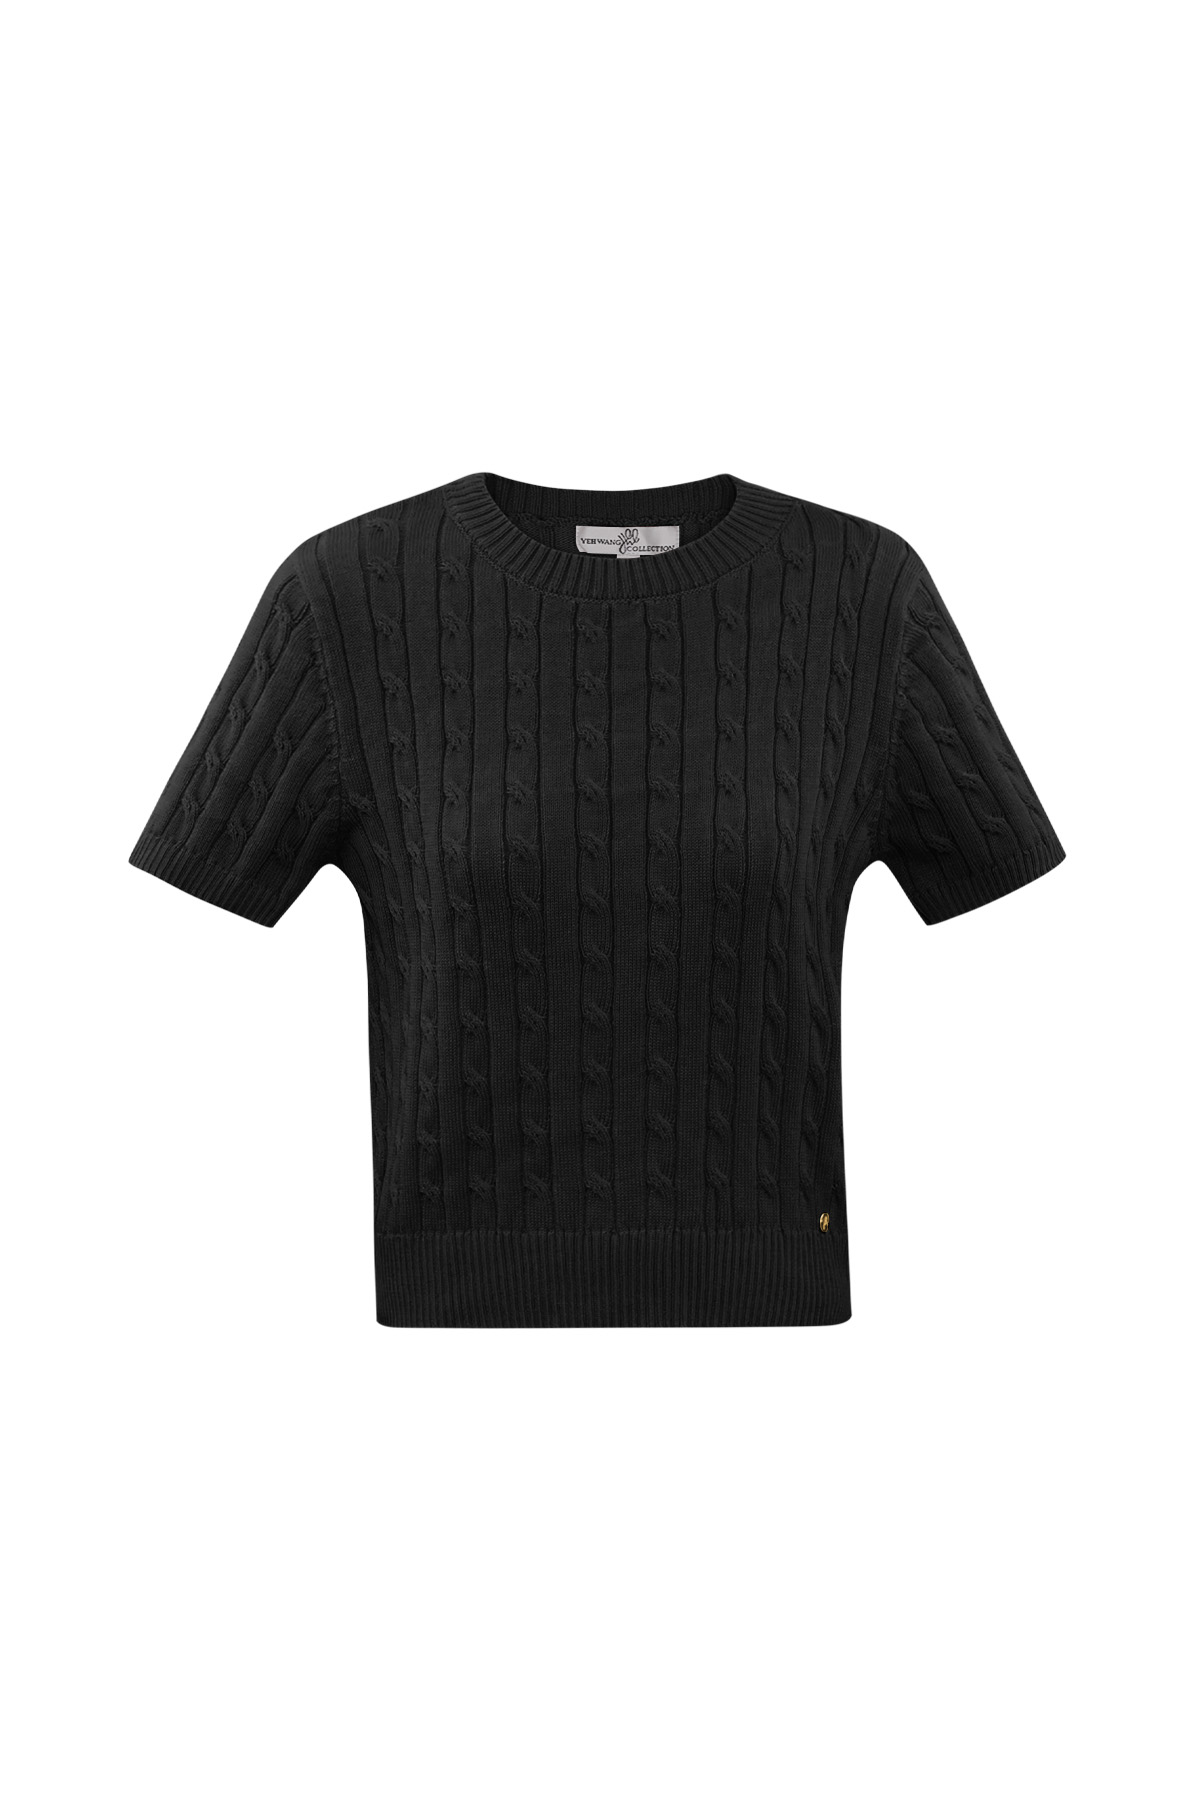 Knitted sweater with cables and short sleeves small/medium – black h5 